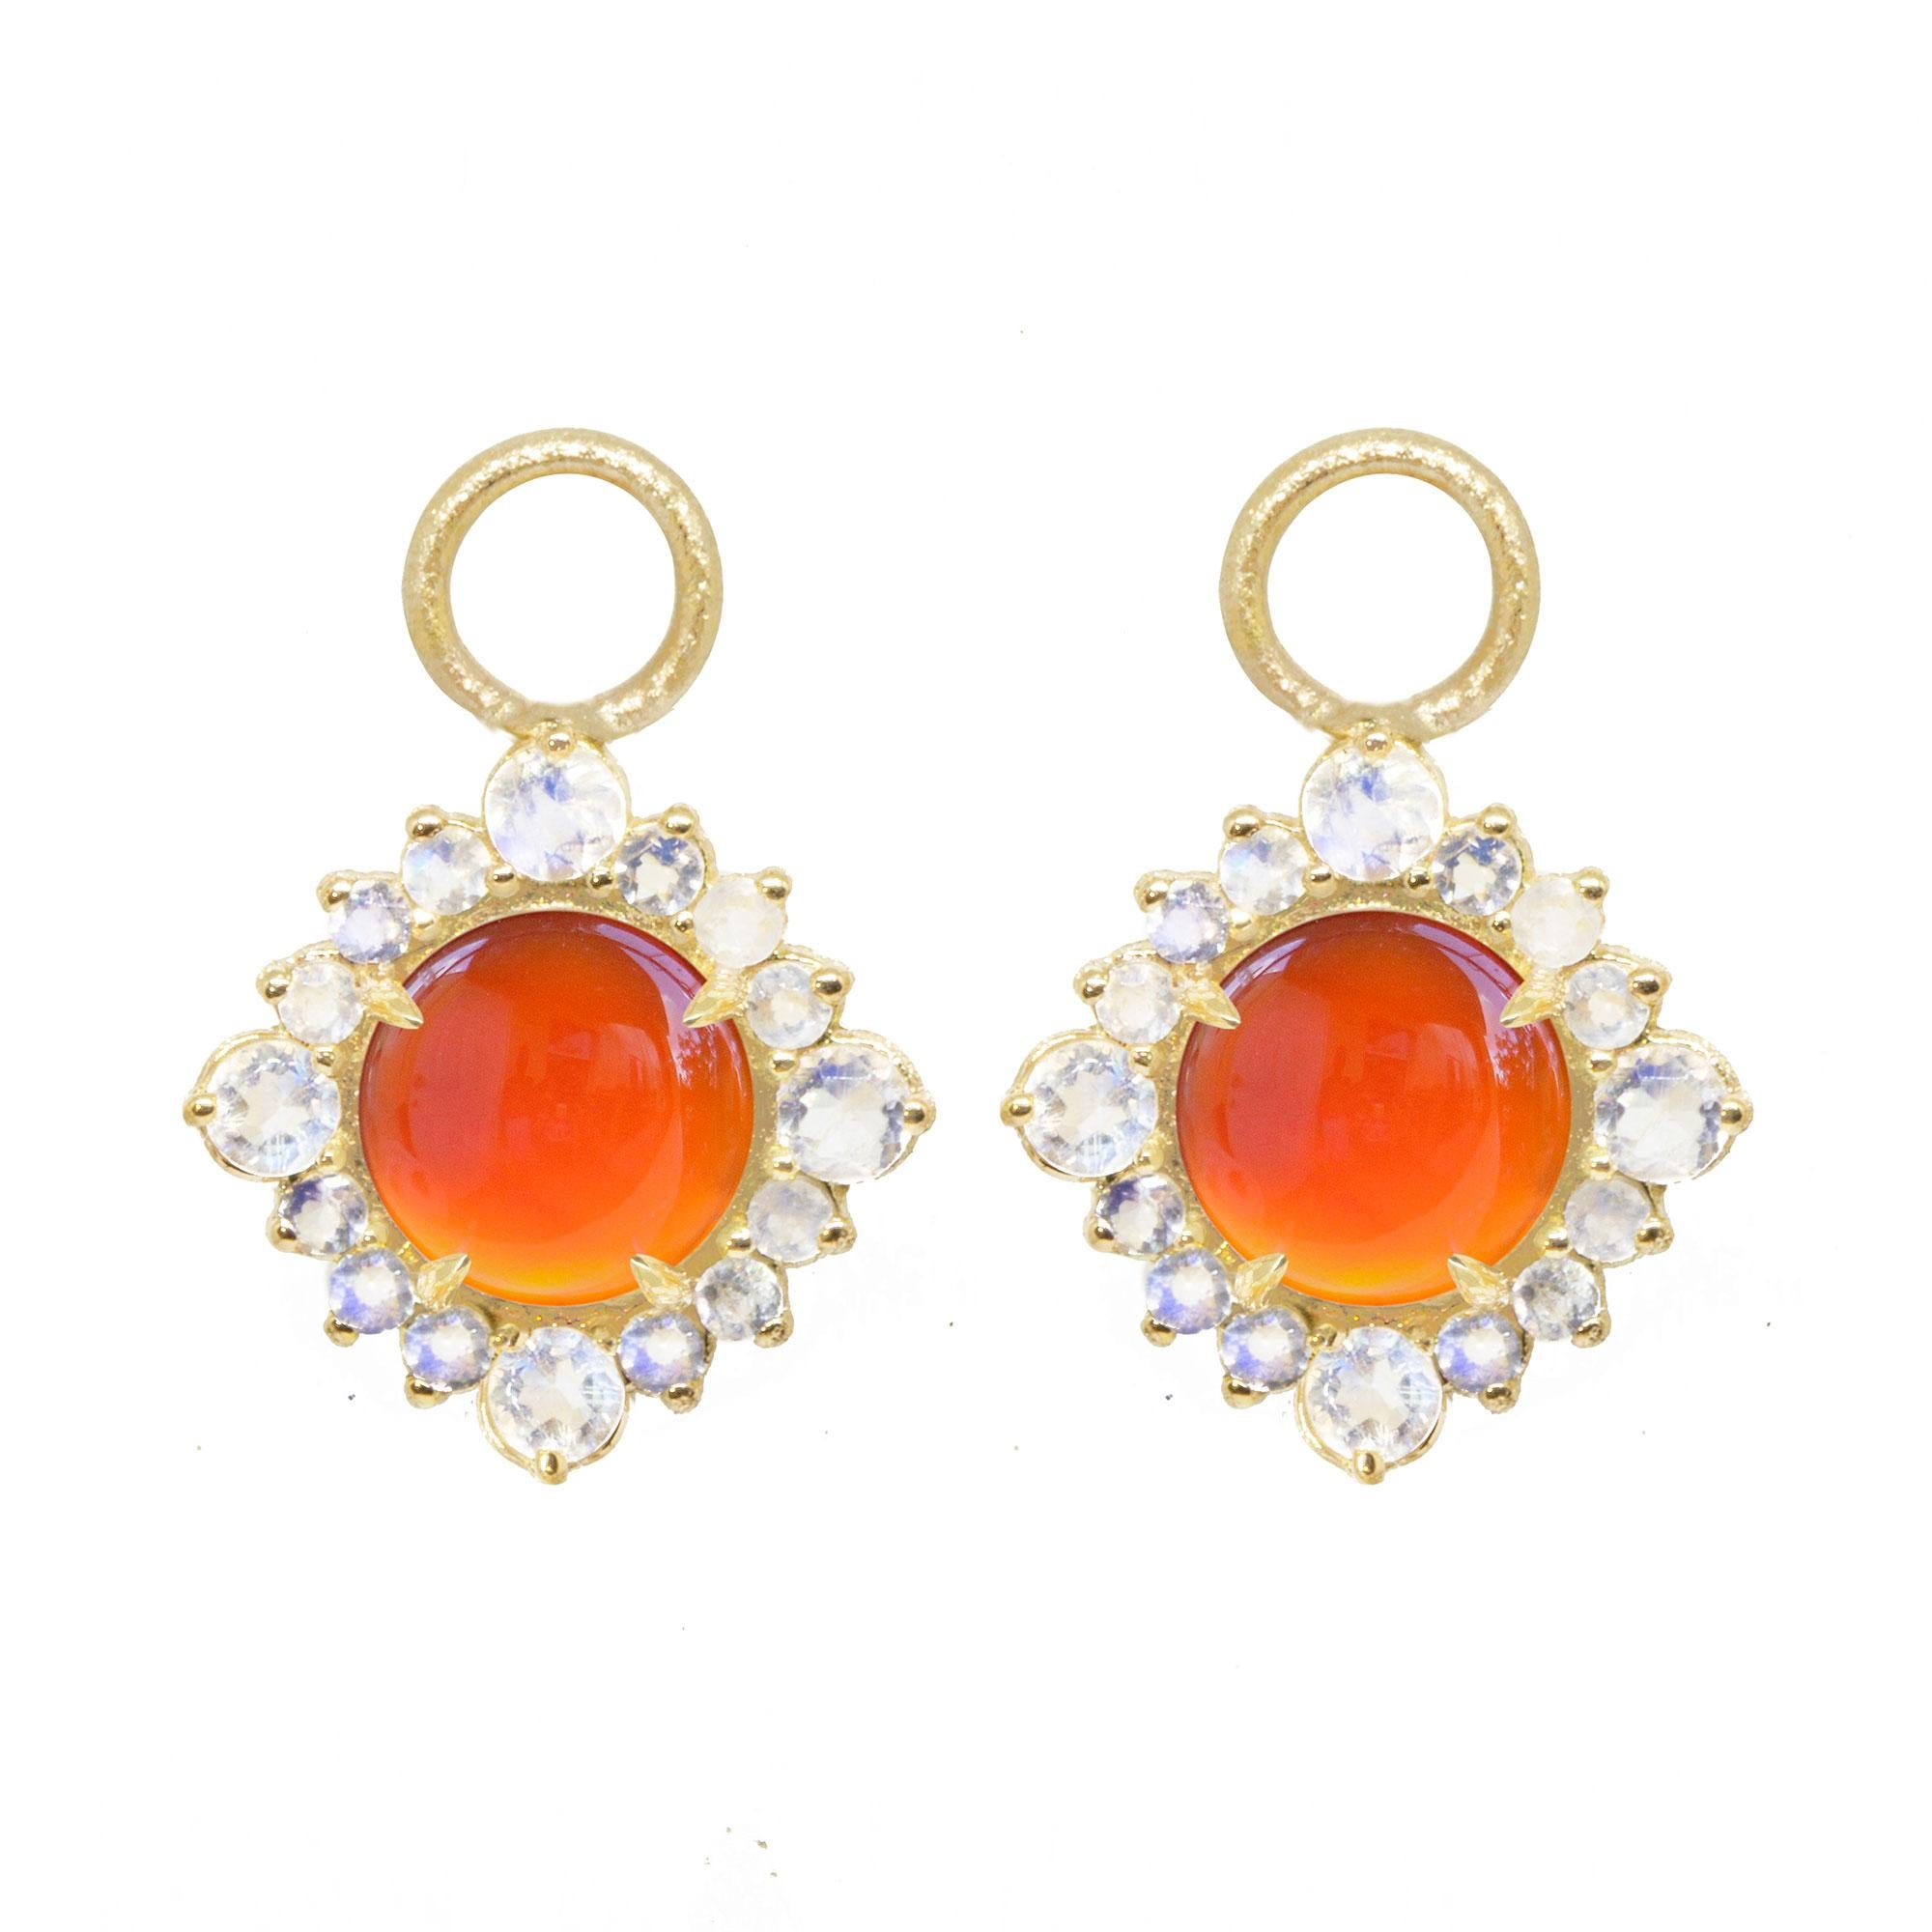 Our moonstone-accented Grace Gold Earring Charms are rimmed in gold, with a vivid carnelian gemstone at the center. Pair them with an hoop, mix them with any style, the Grace Silver Earring Charms made a great addition.

Hoops and charms are sold